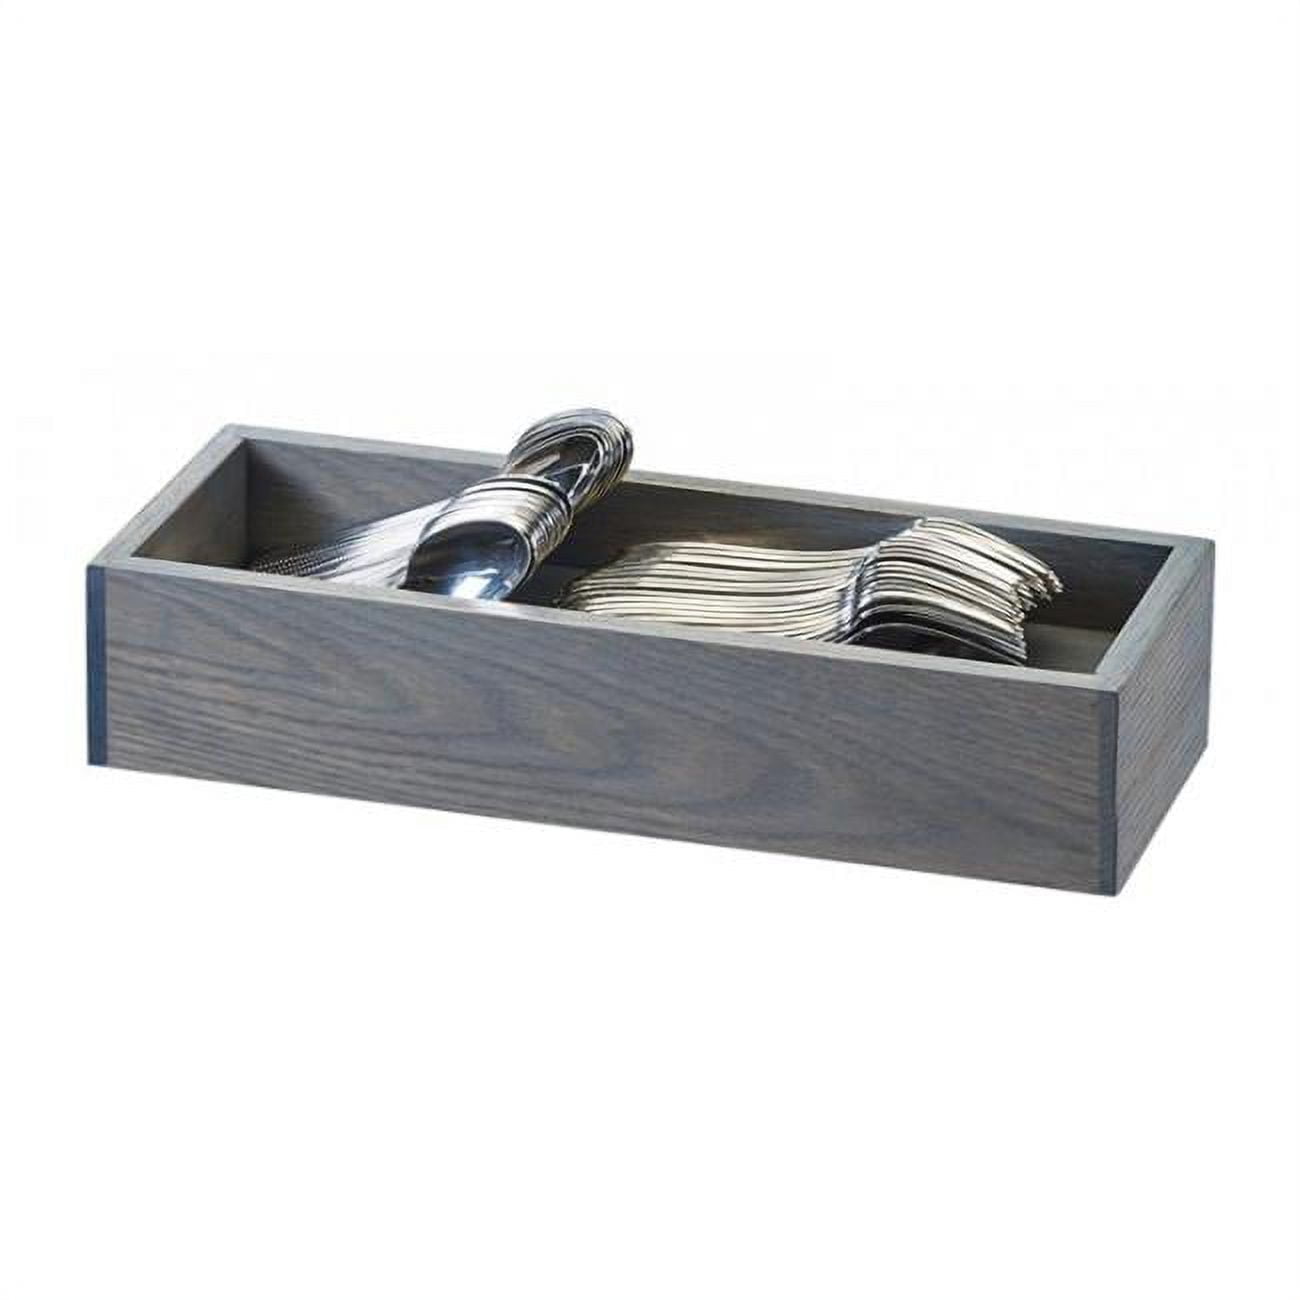 Picture of Cal Mil 3819-83 Ashwood 2 Compartment Gray Oak Wood Flatware Organizer - 15 x 6 x 3 in.